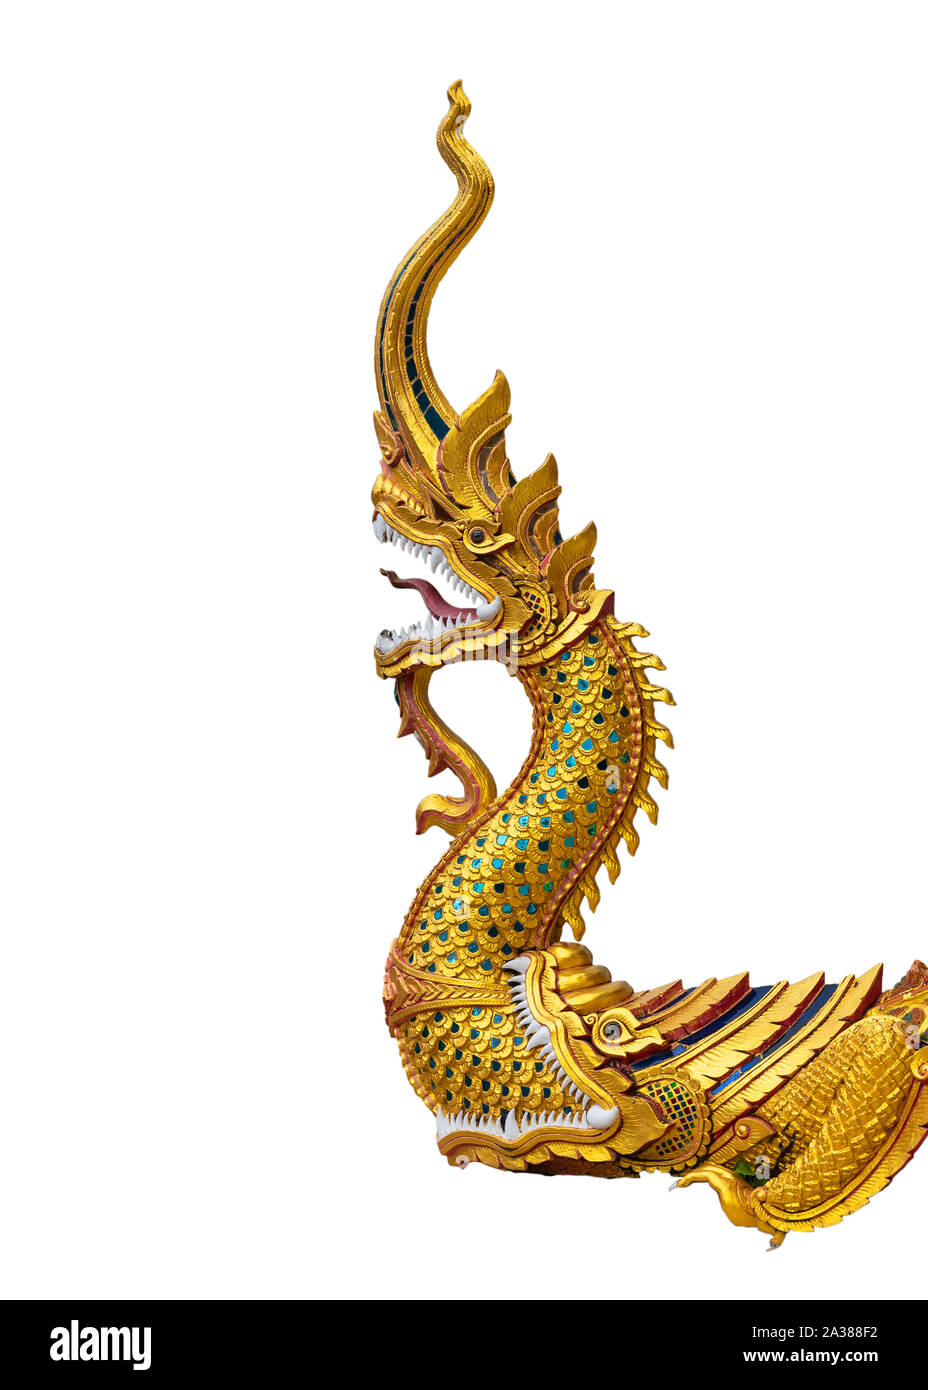 Thai Dragon or Serpent statue isolated on white background. Is the art of Thailand that can be seen in temple. Stock Photo